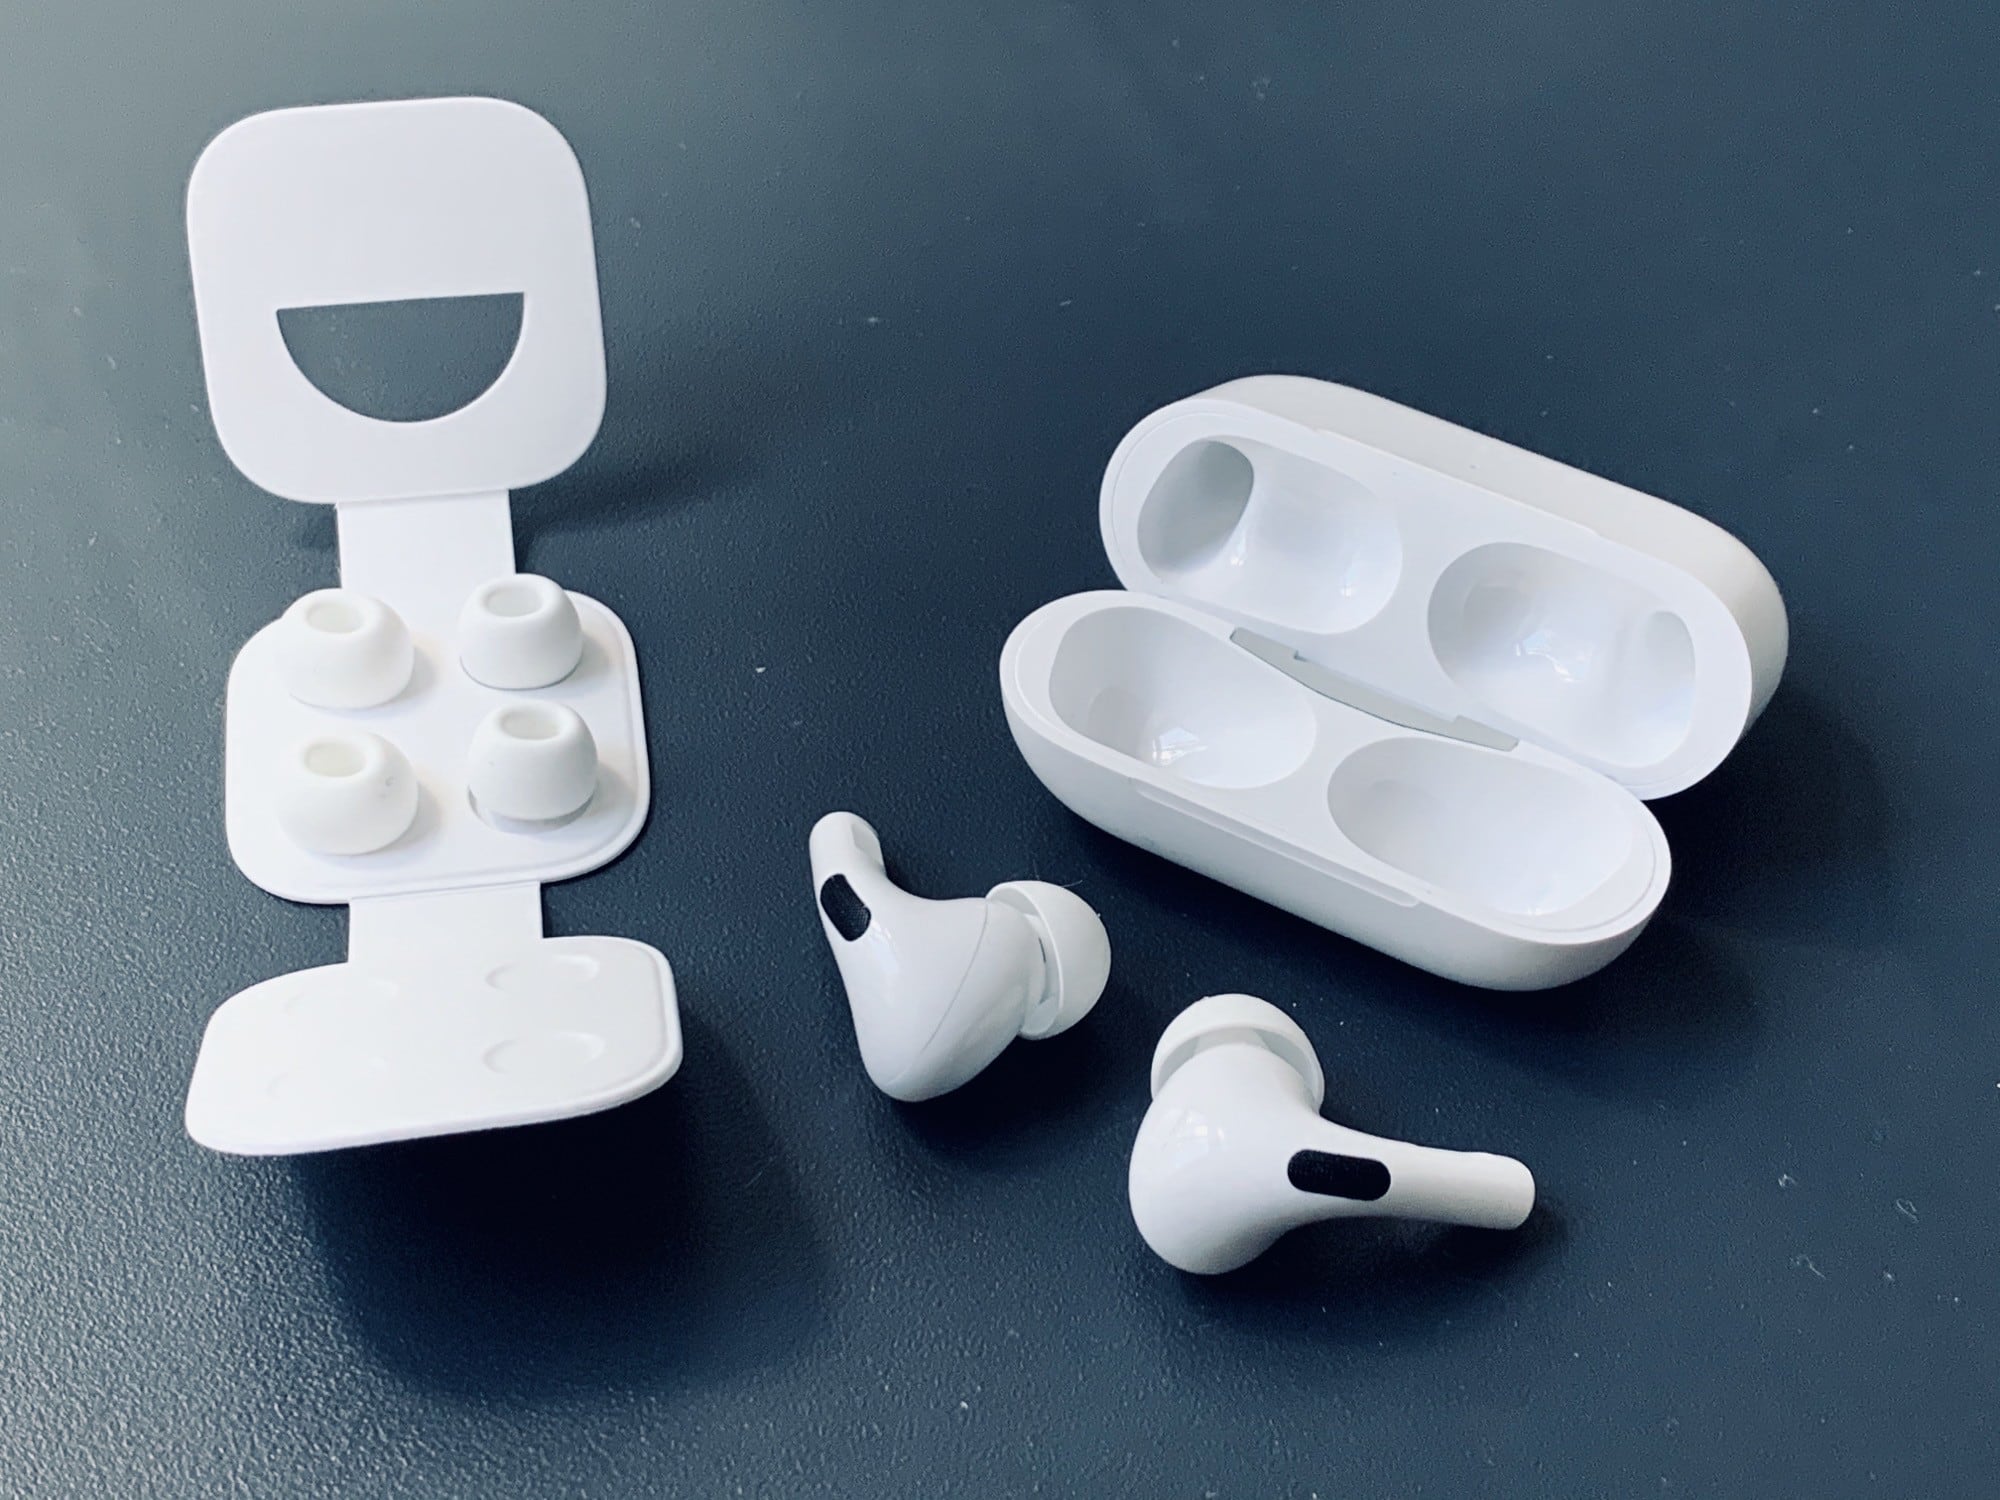 The AirPods Pro come with three pairs of silicone tips